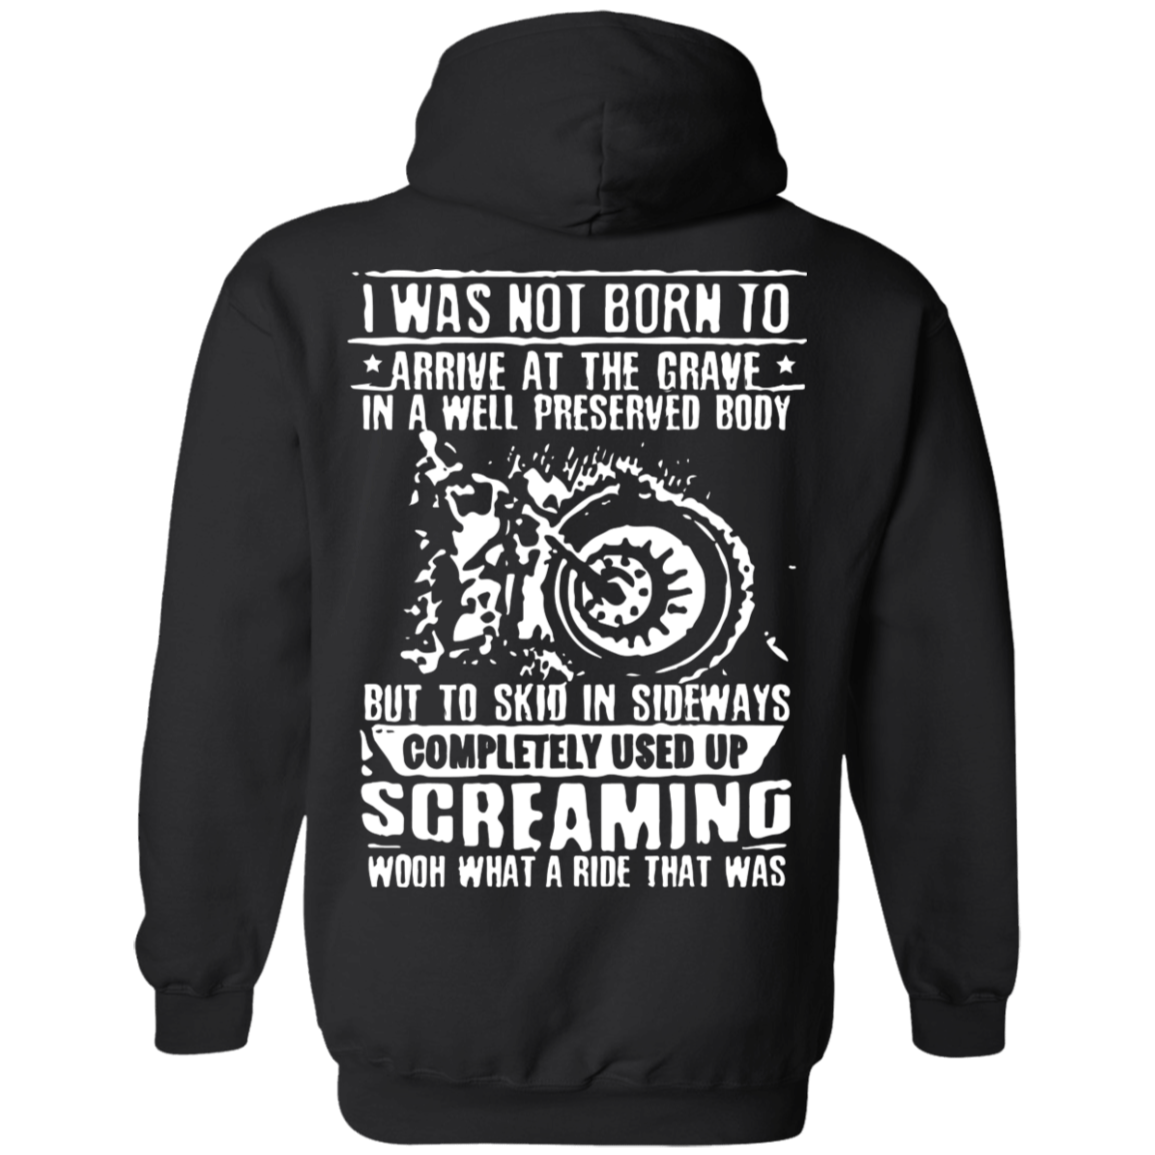 I Was Not Born To Arrive At The Grave In A Well Preserved Body Hoodie, Unisex, Cotton/Polyester, Black w/ White Print